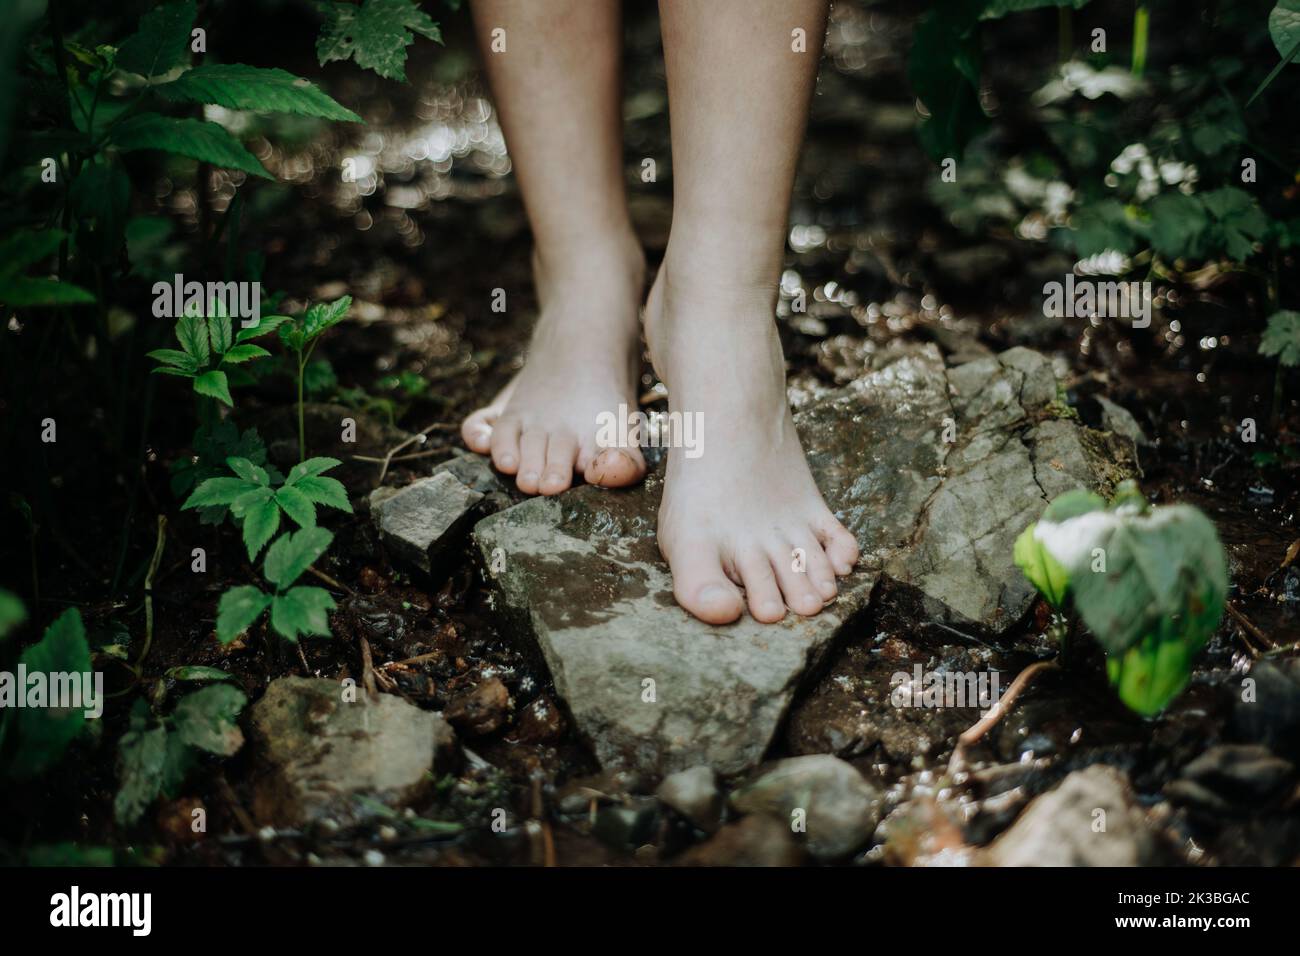 Close-up of barefoot legs walking in forest. Concept of healthy feet. Stock Photo